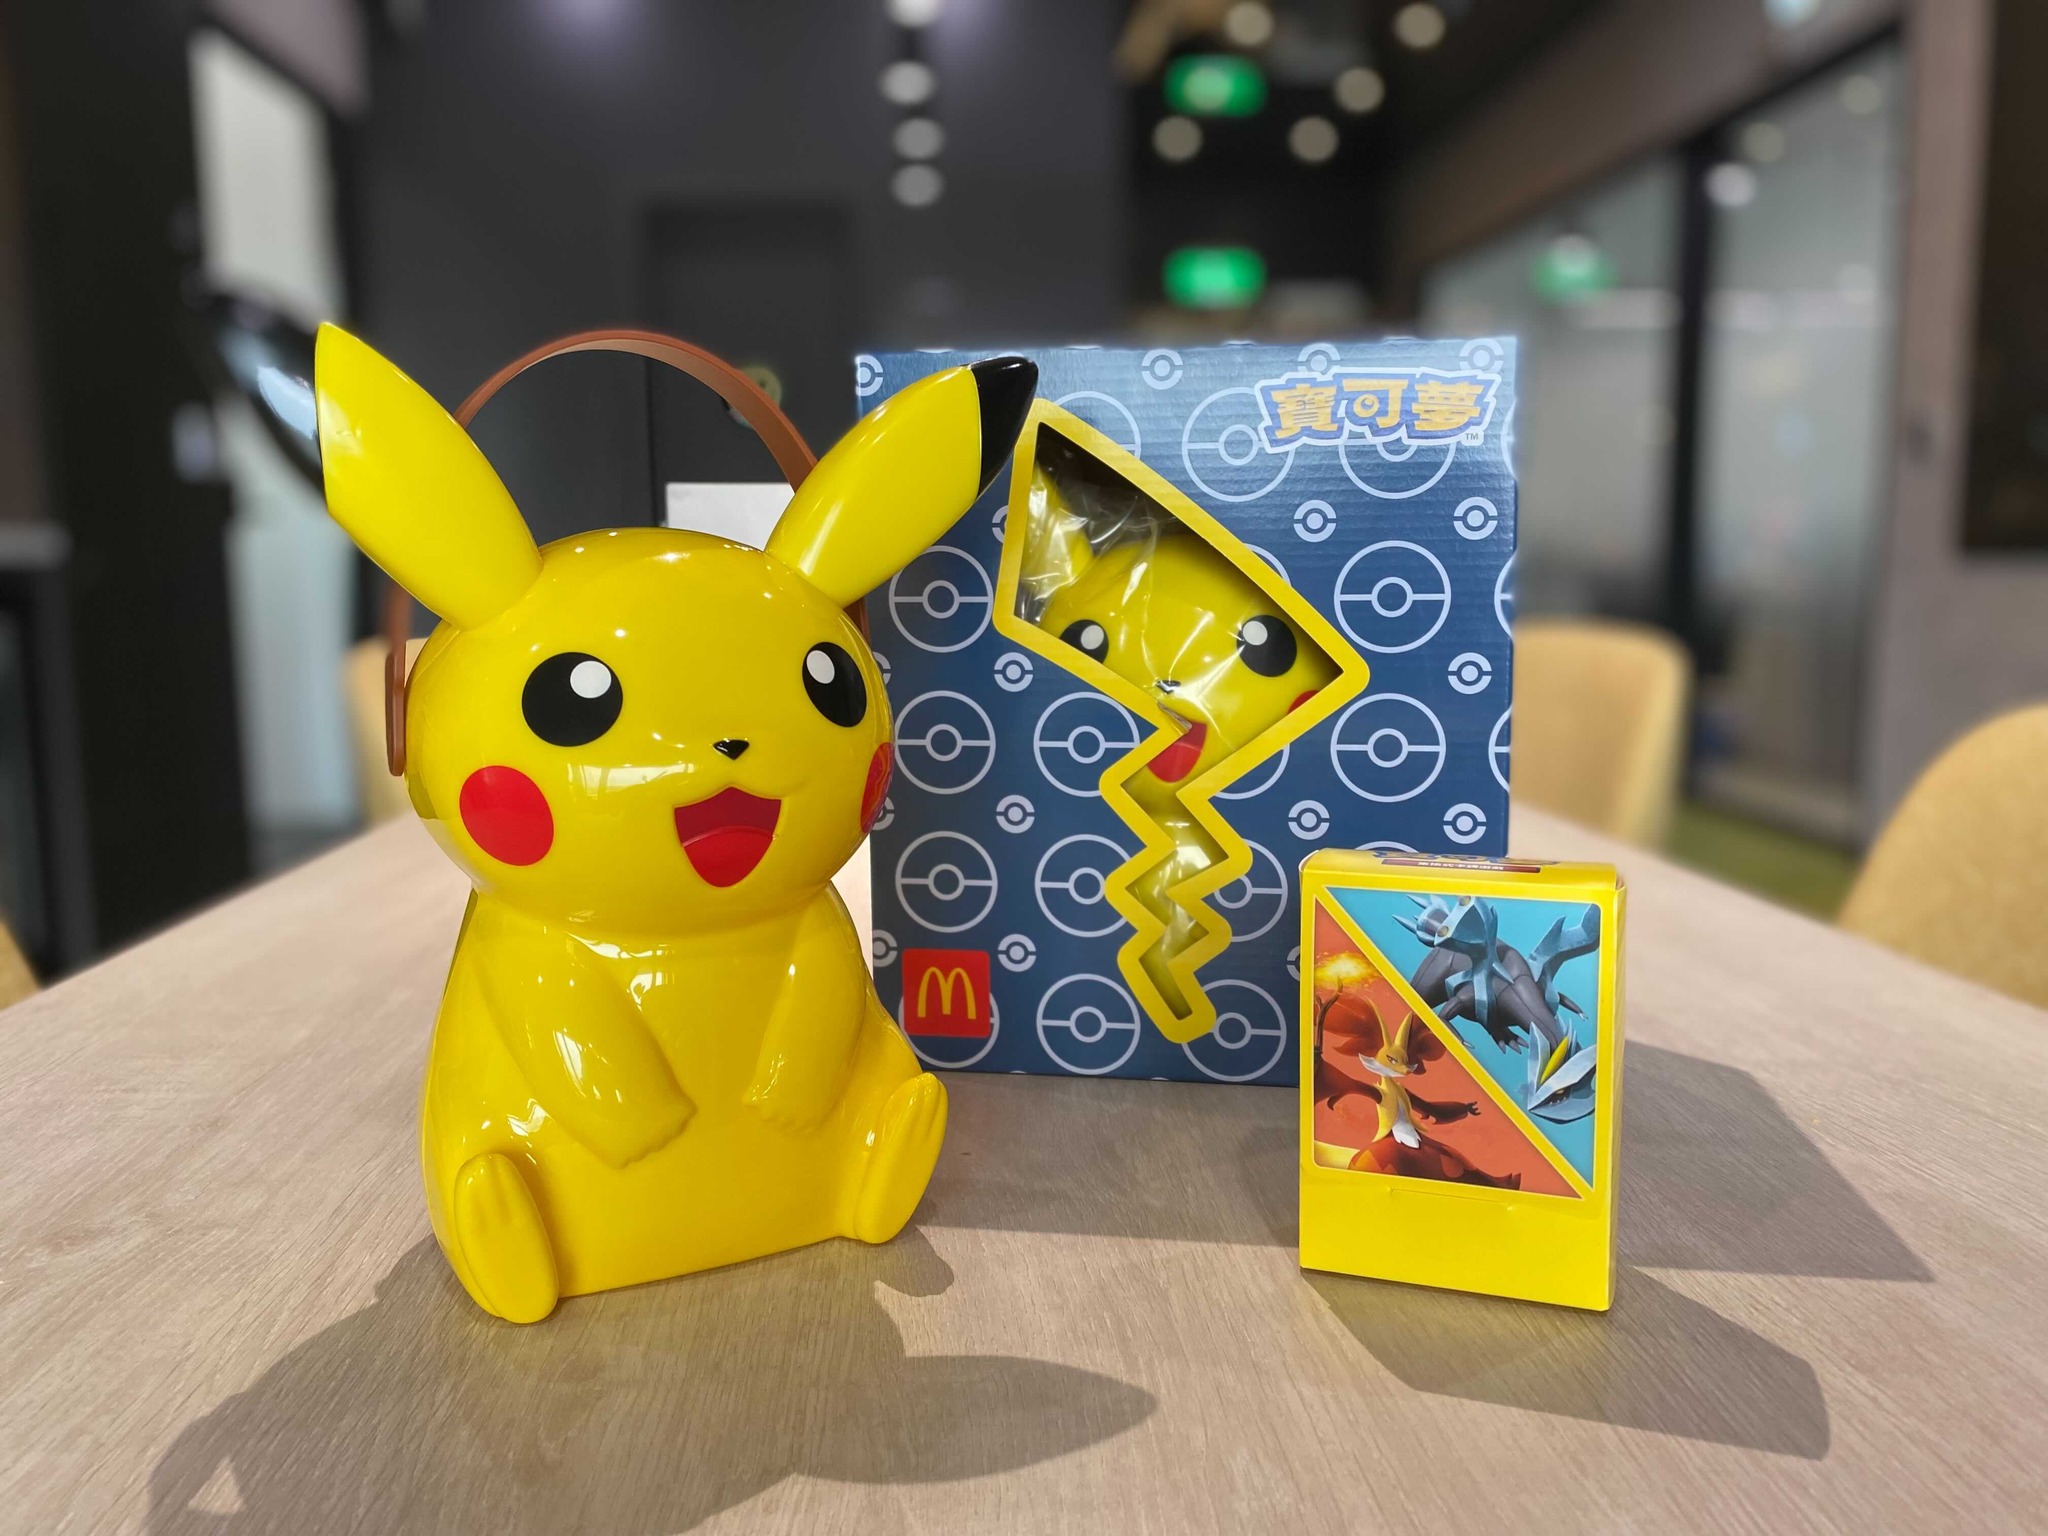 McDonald's Pikachu Carrier Available On 8 Sep, Long Queues In The